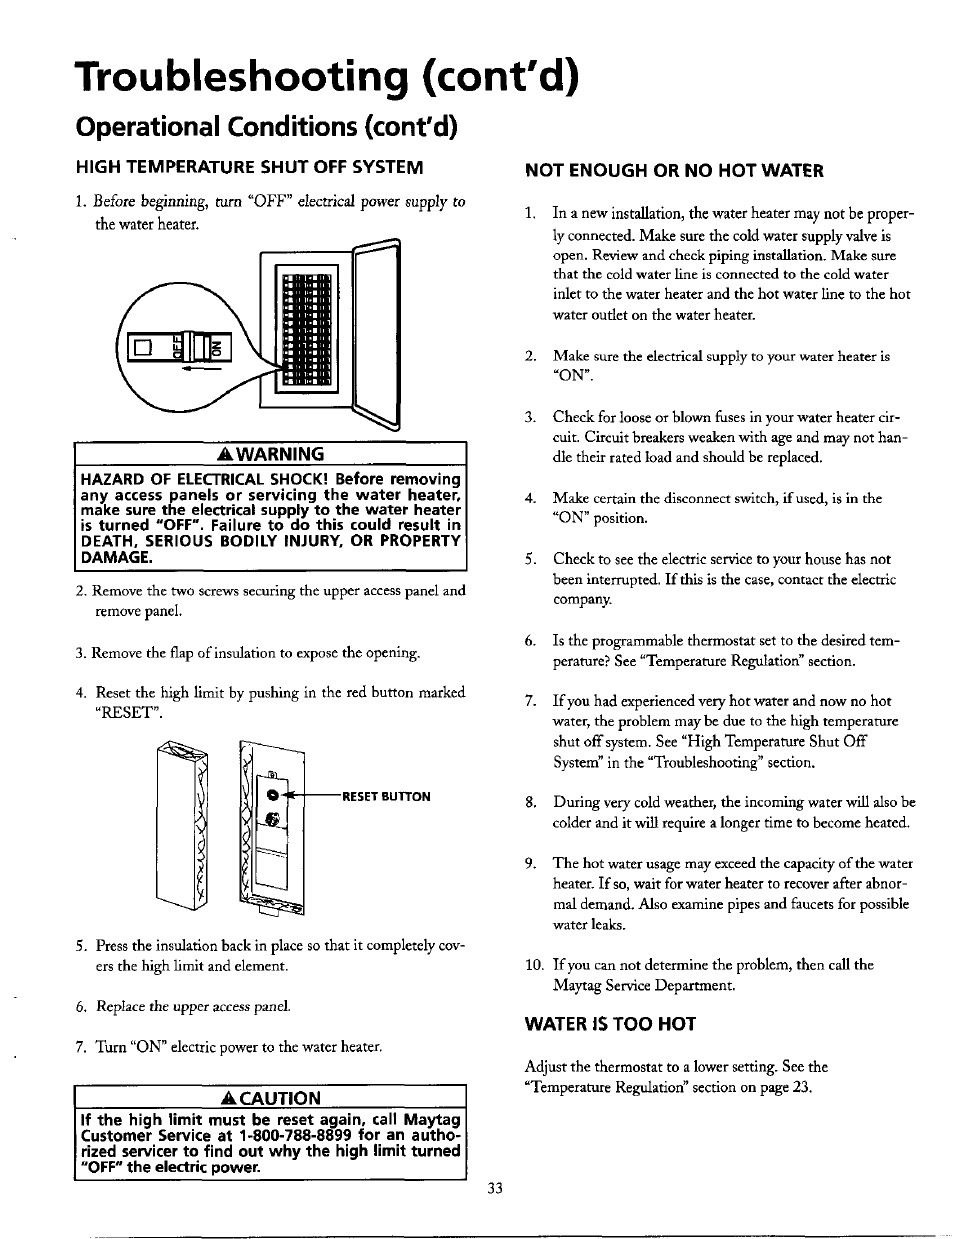 Operational conditions (cont'd), High temperature shut off system, Not enough or no hot water | Water is too hot, Not enough hot water, Troubleshooting (cont'd), Awarning, A caution | Maytag HE21250PC User Manual | Page 33 / 40